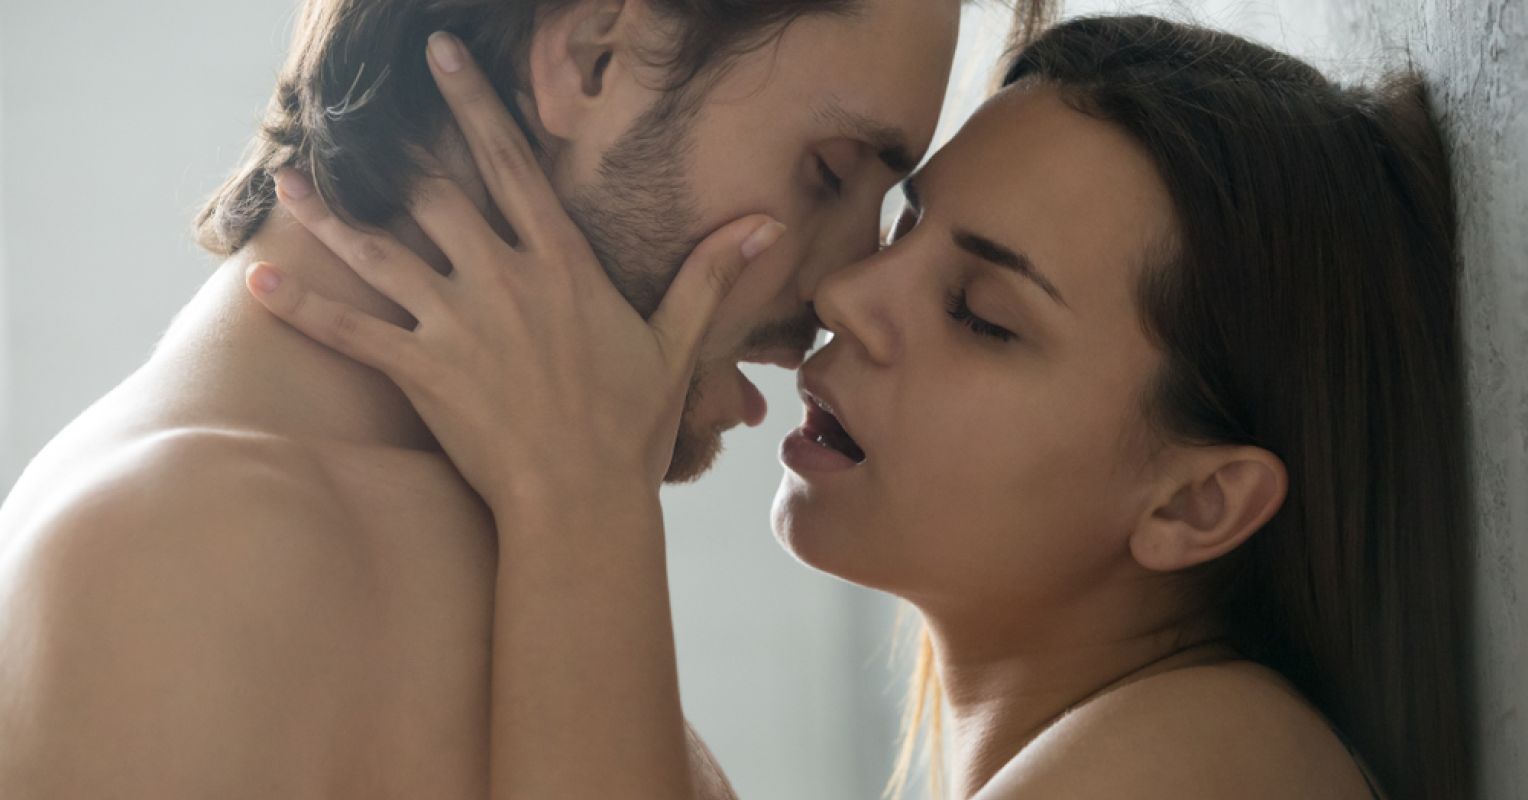 Why We Scream and Moan During Sex Psychology Today pic